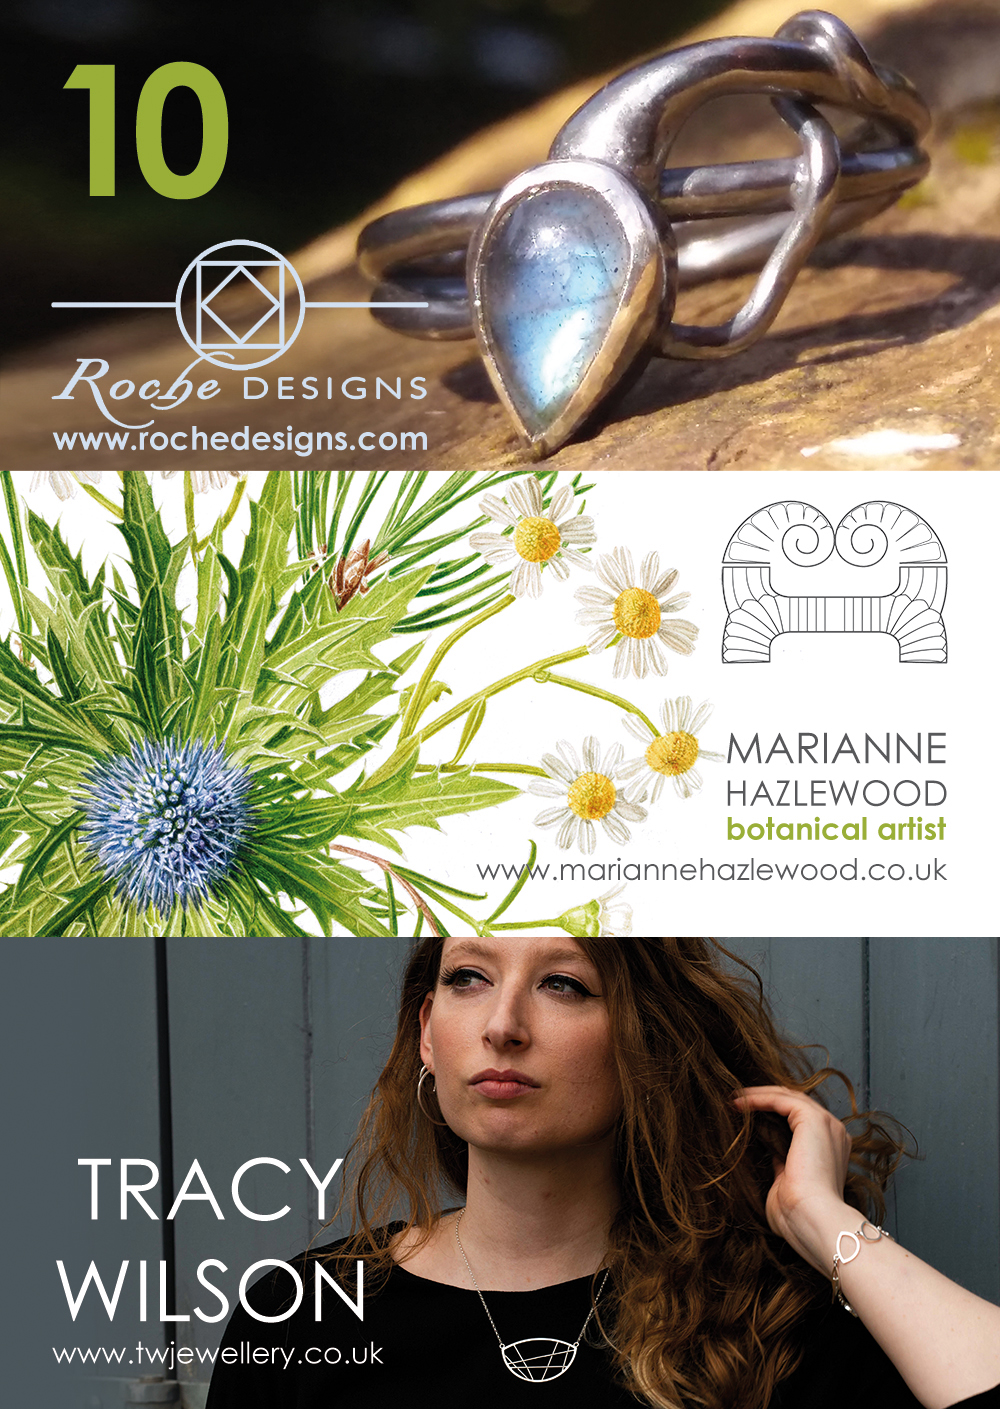 Poster for the 2023 Pittenweem Arts Festival - featuring - Roche Designs, www.rochedesigns.com, Silver ring with tear shaped gem stone, Marianne Hazlewood, botanical artist, www.mariannehazlewood.co.uk, bouquet watercolour painting featuring sea thistle, daisies and pine, Tracy Wilson, www.twjewellery.co.uk, contemporary silver pendant & link bracelet